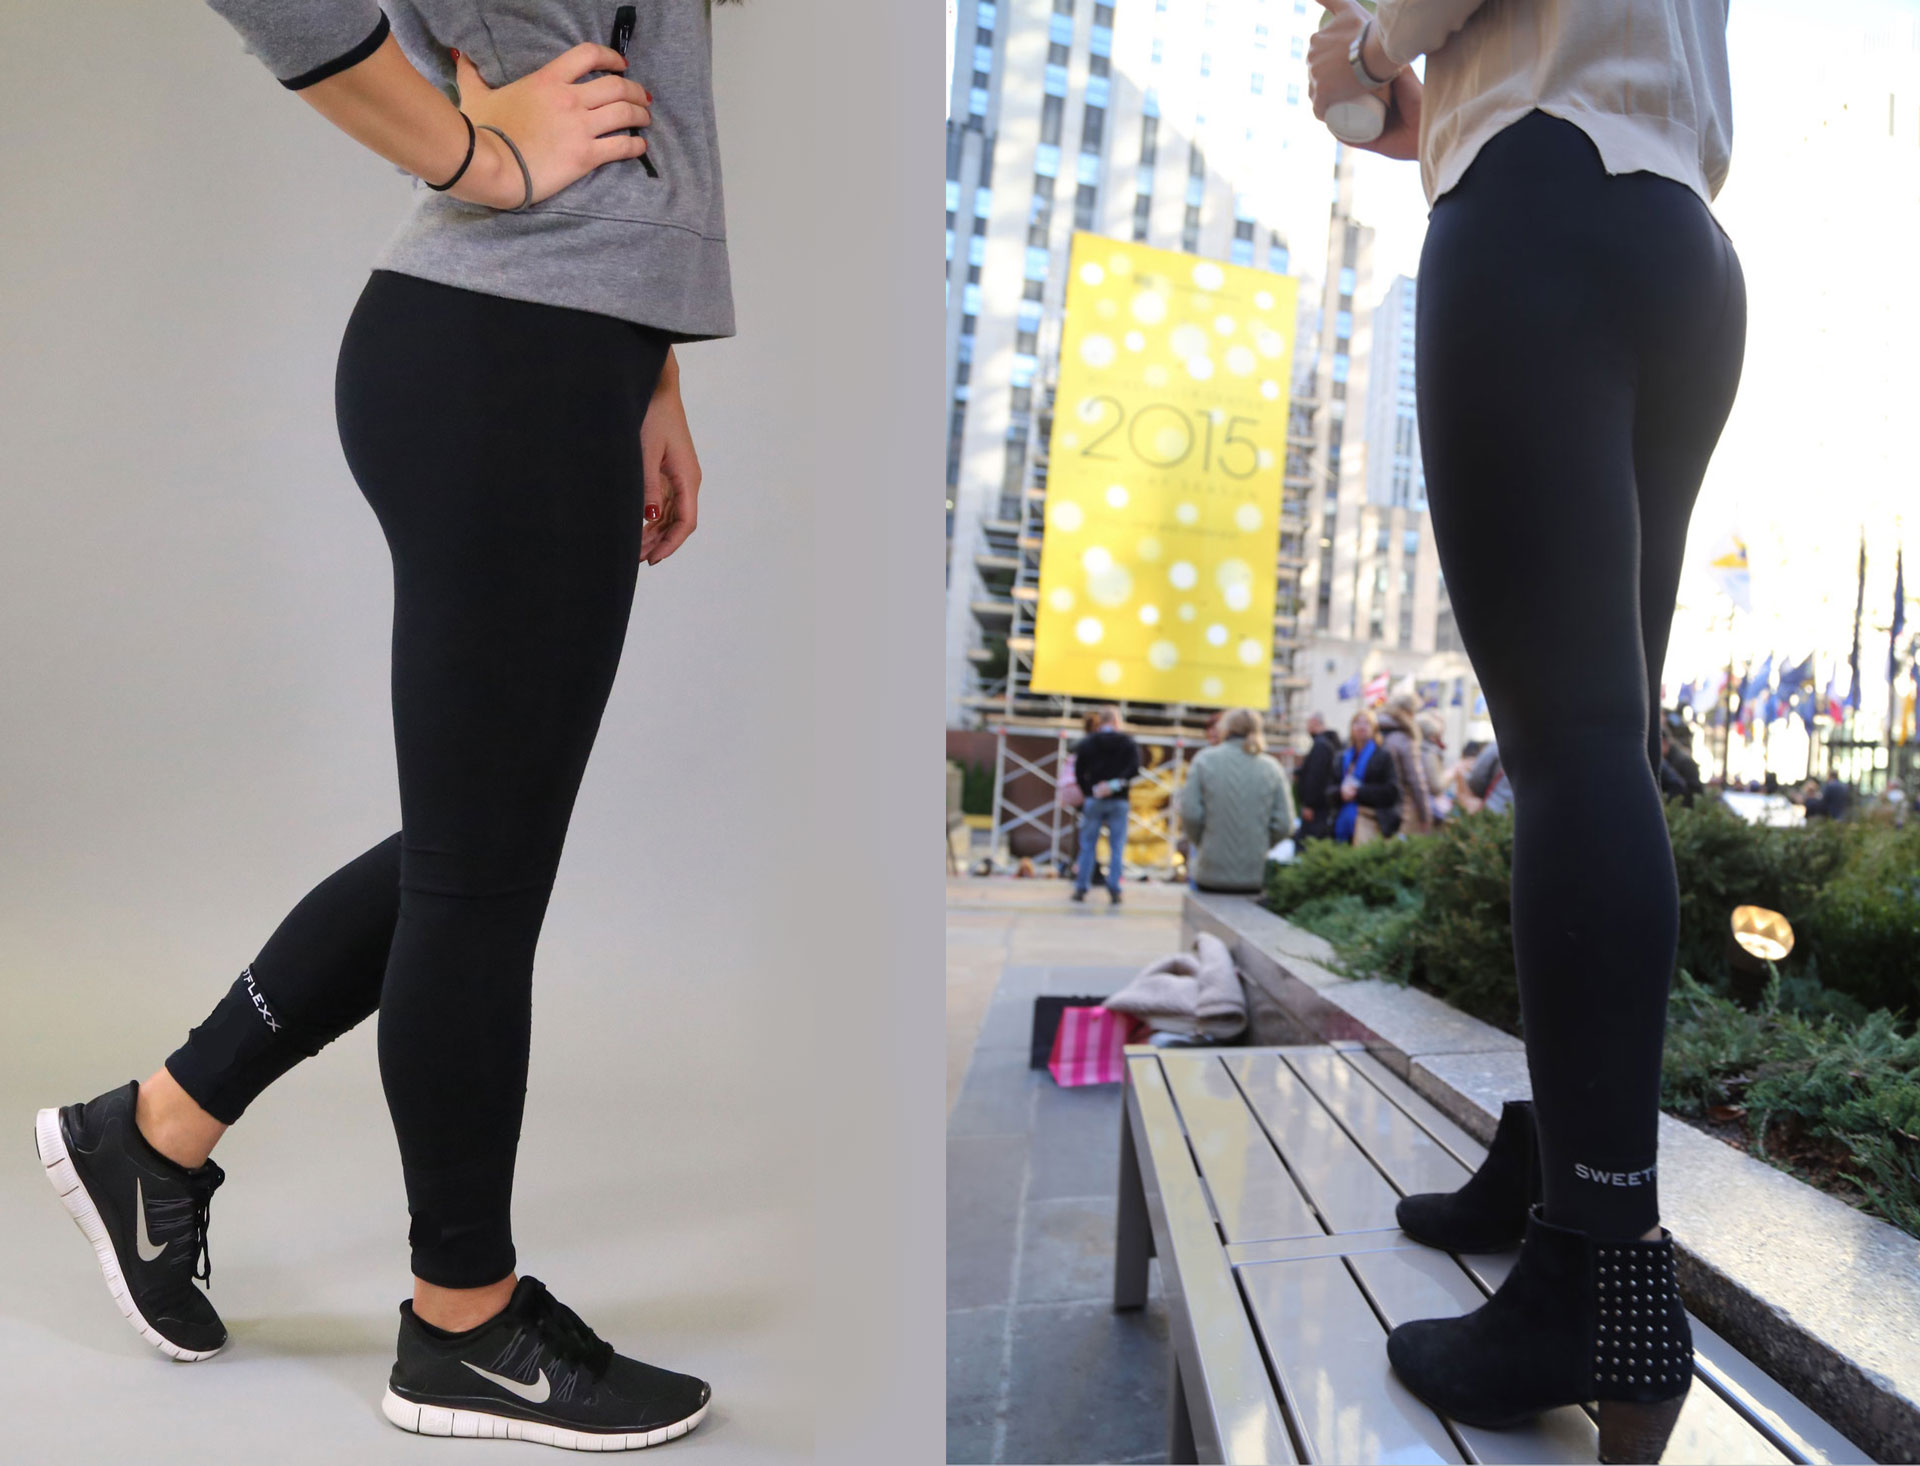 Stylish Workout Gear for a Fit Body